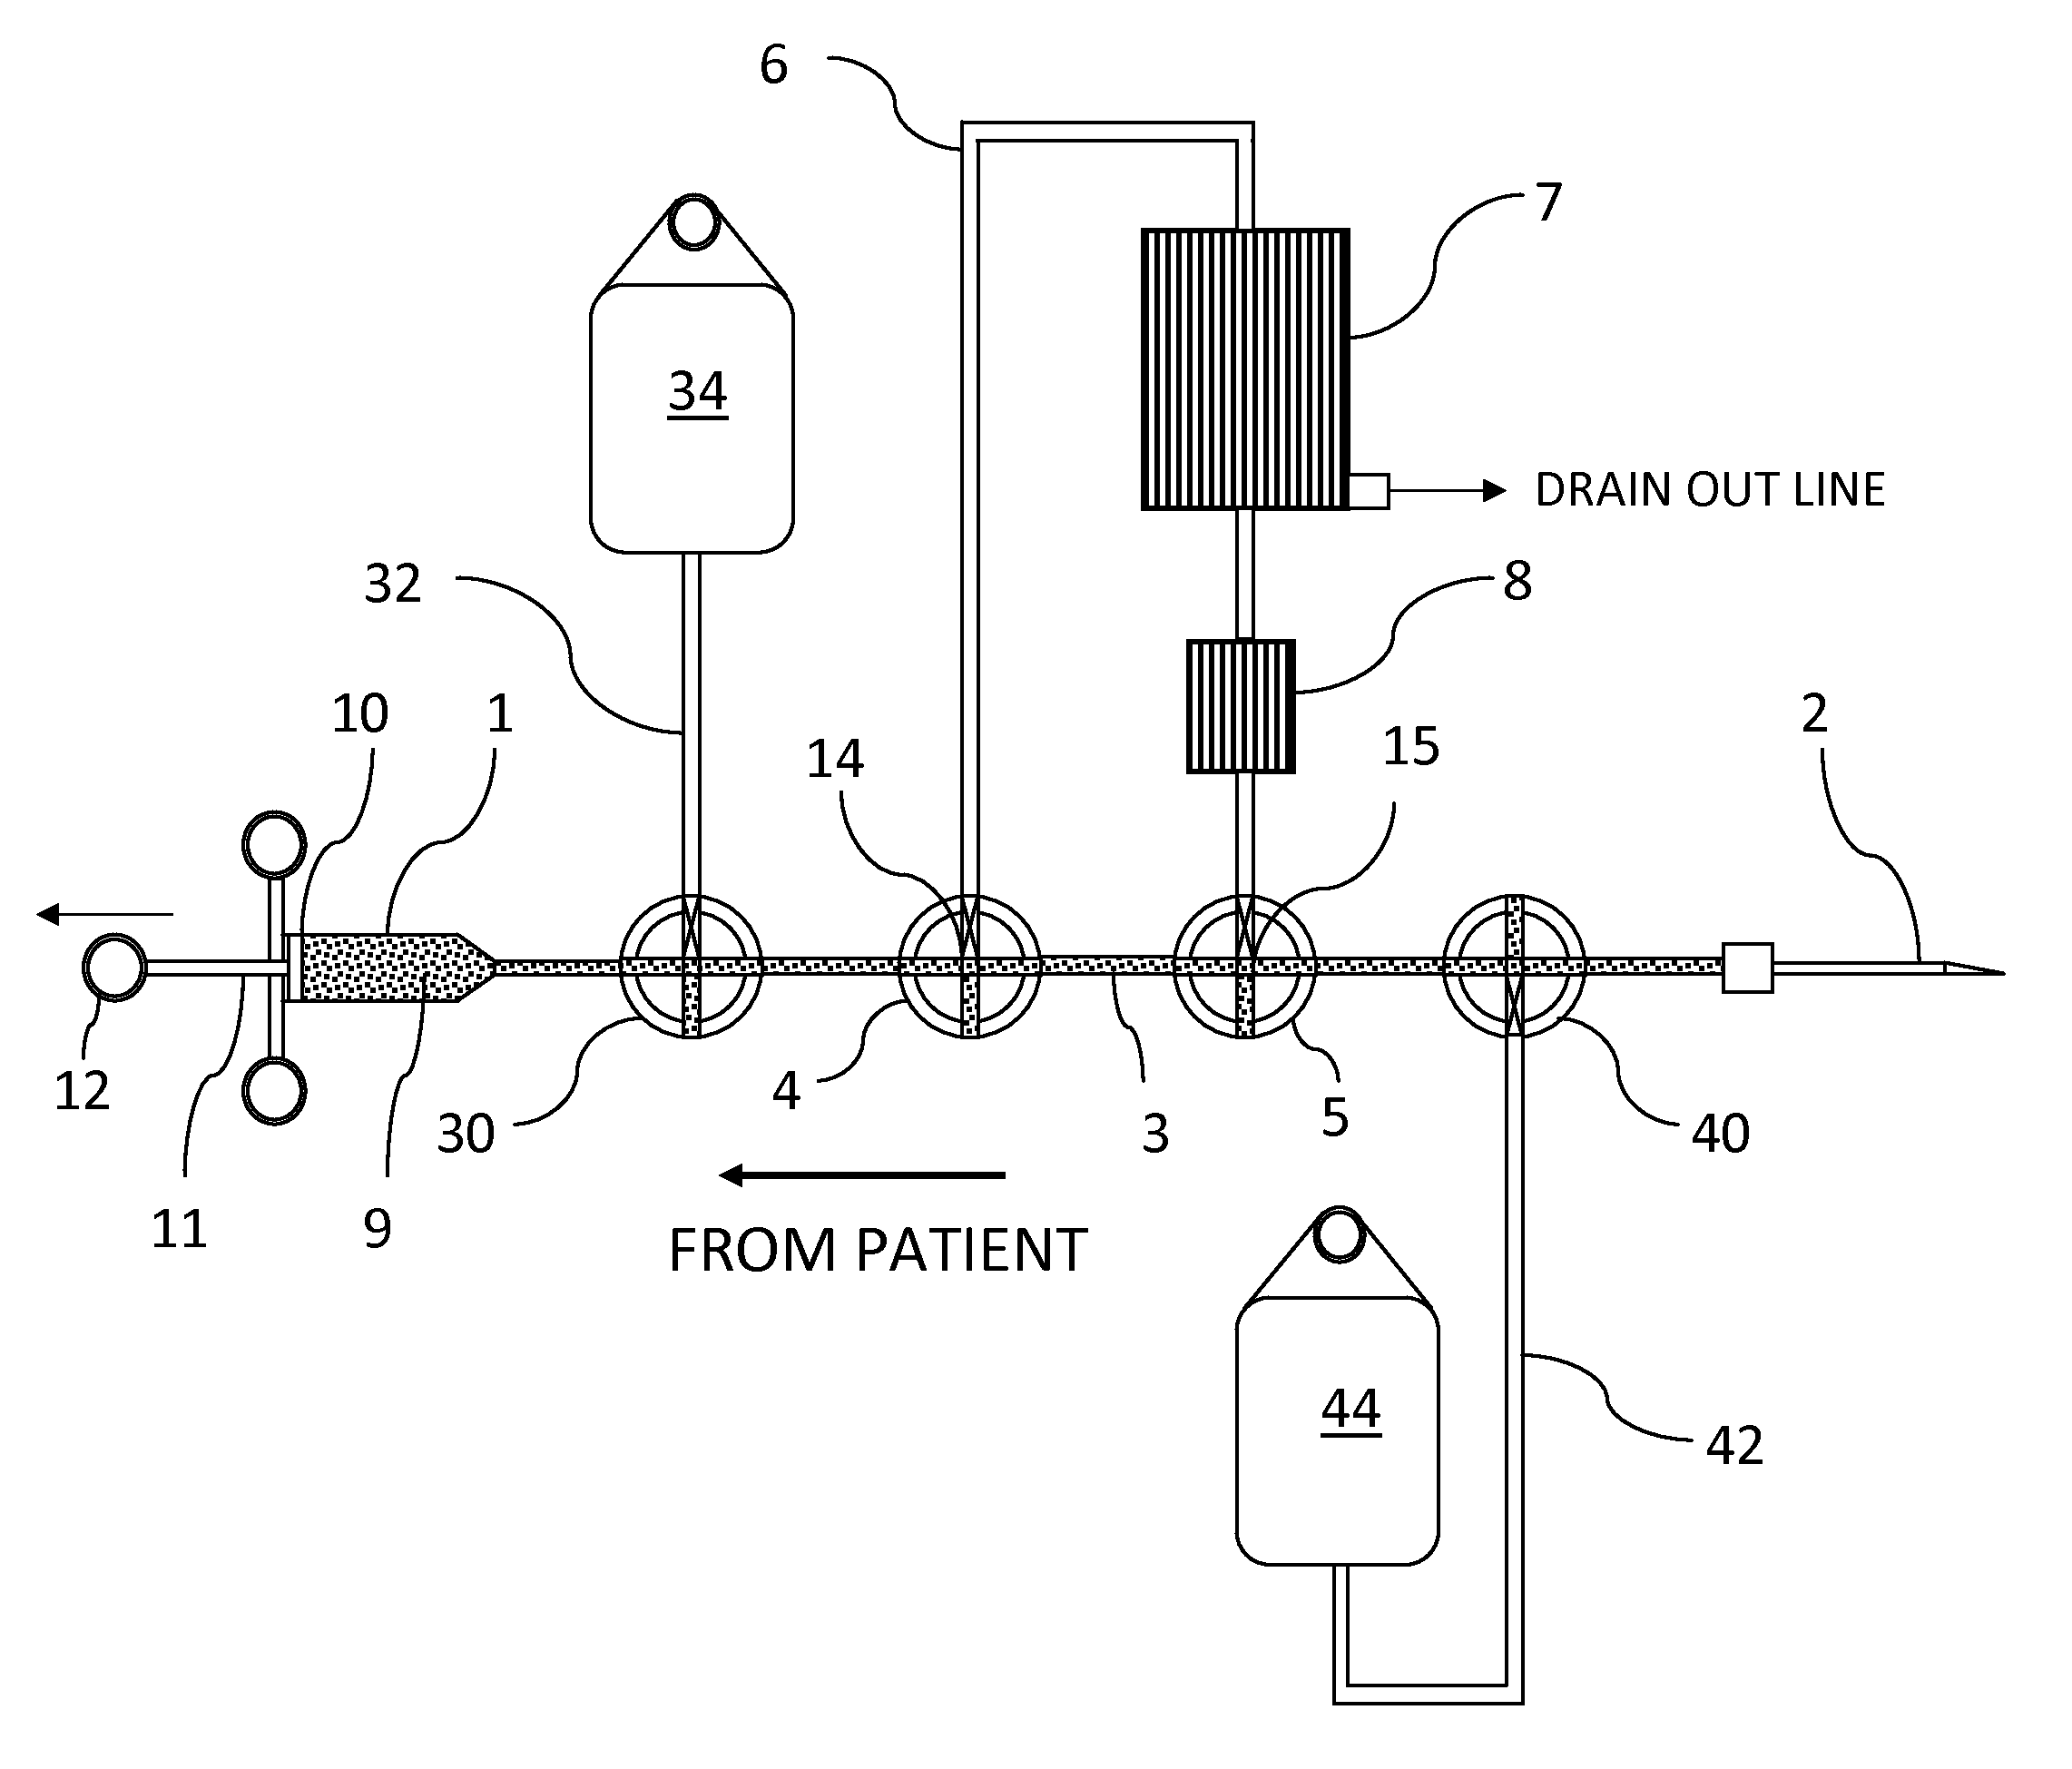 Manually operated disposable single-needle circuit for extracorporeal treatment of blood